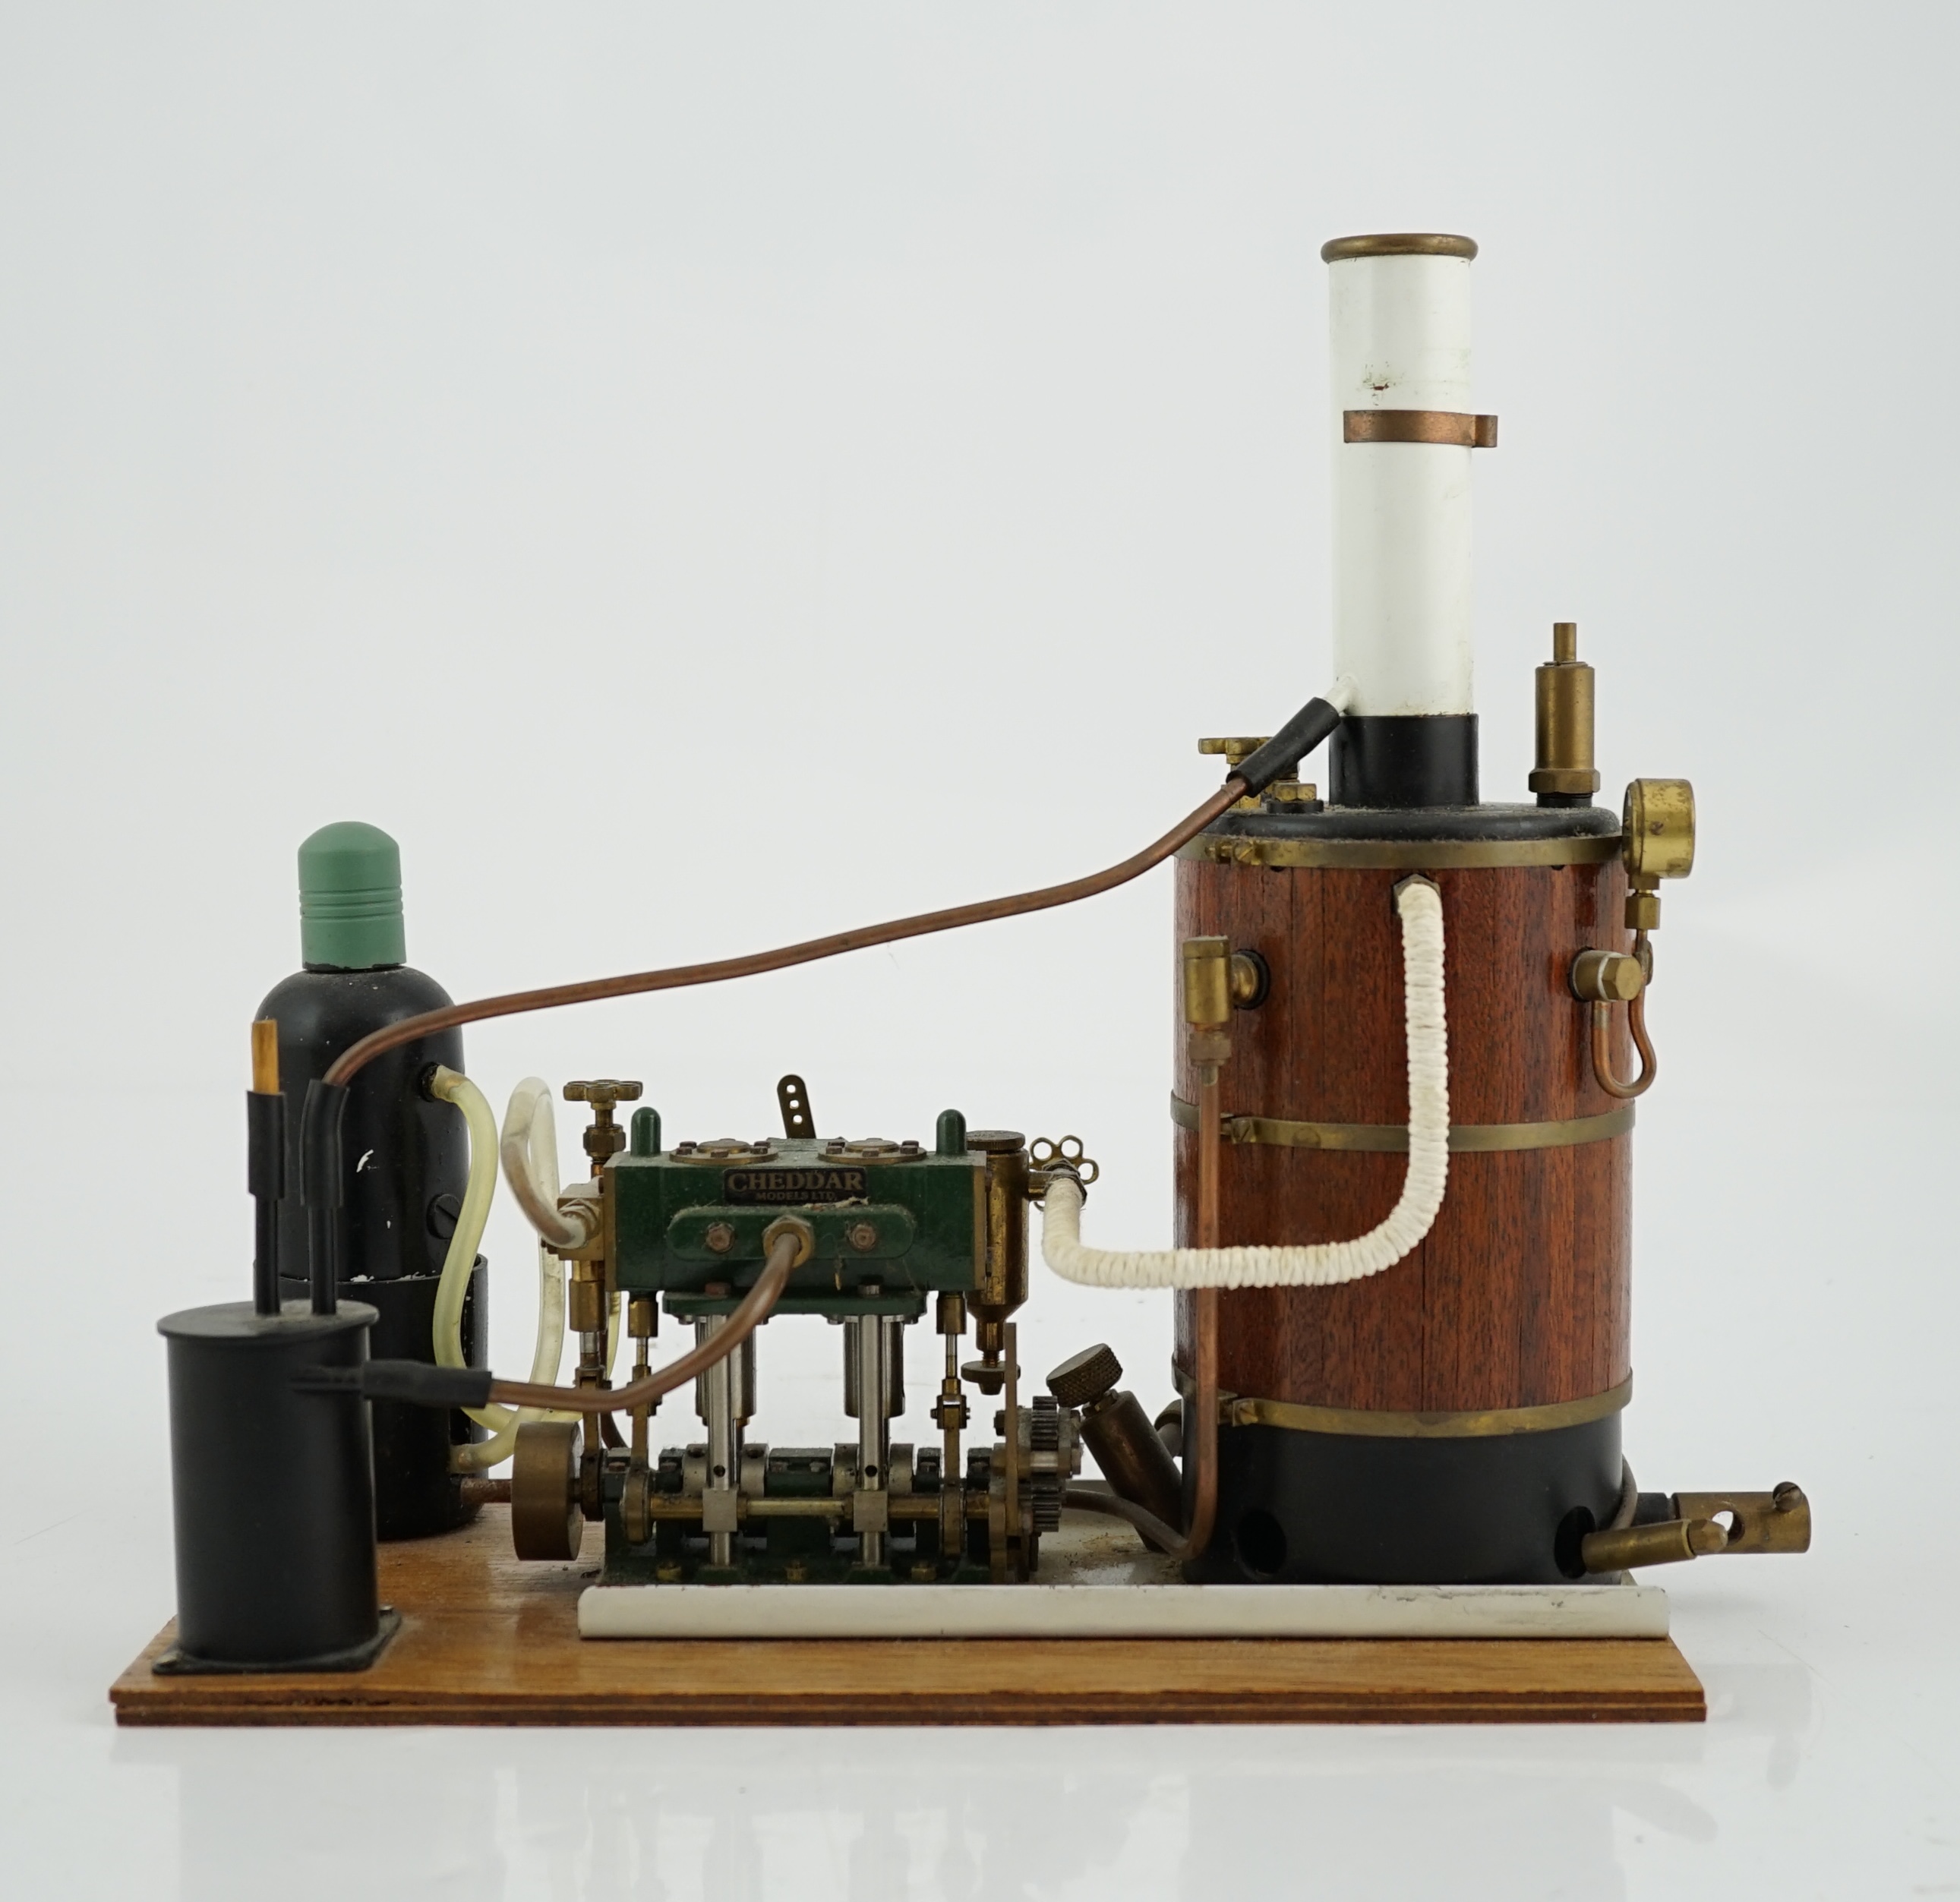 A Cheddar Models Ltd. Proteus steam plant, a gas fired vertical boiler two cylinder marine engine, with a wood clad copper boiler fitted with pressure gauge, water sight glass and safety valve